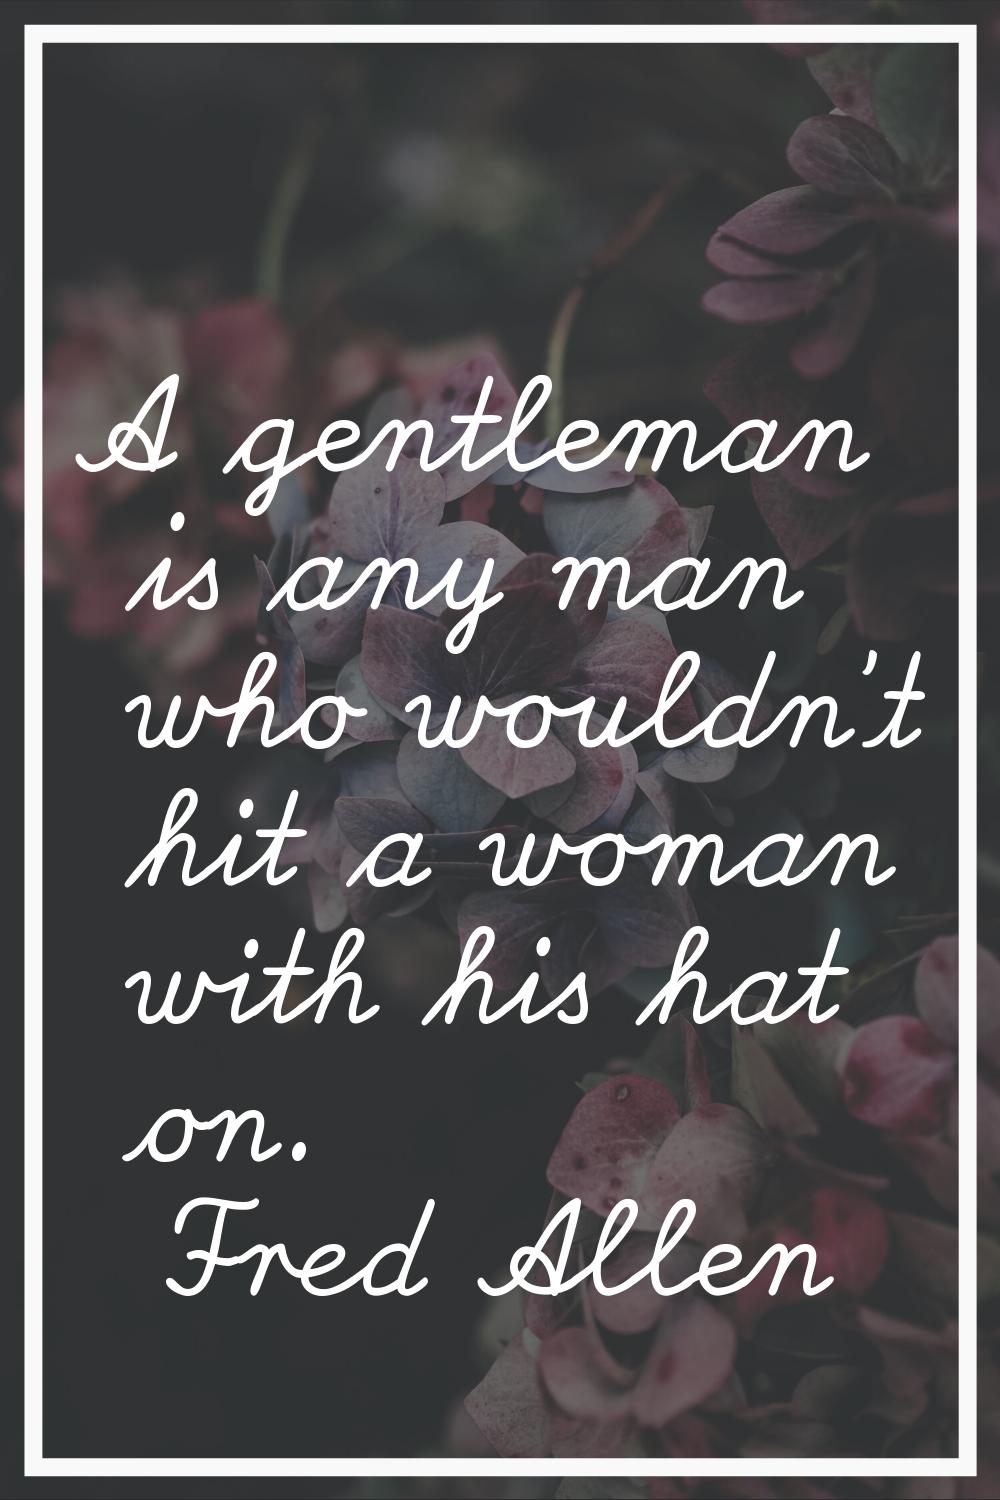 A gentleman is any man who wouldn't hit a woman with his hat on.